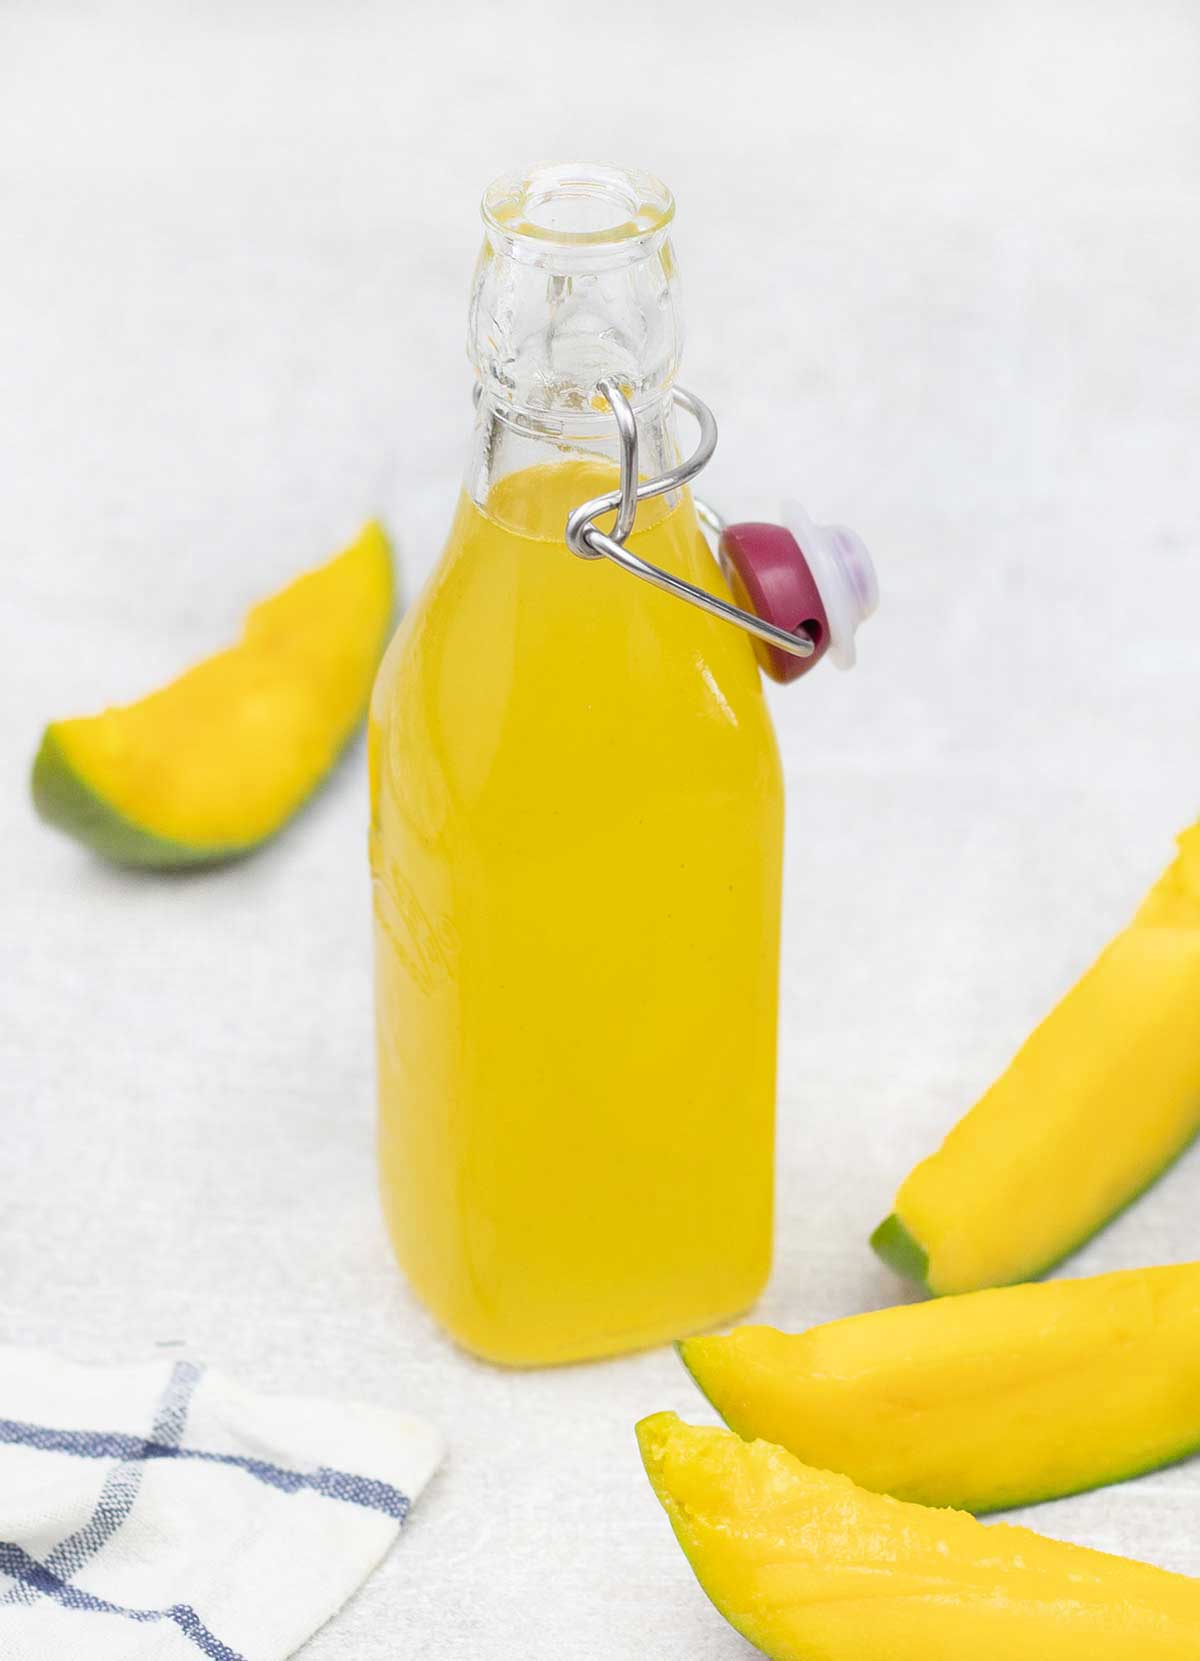 Mango syrup in a glass bottle and some mango slices around it.